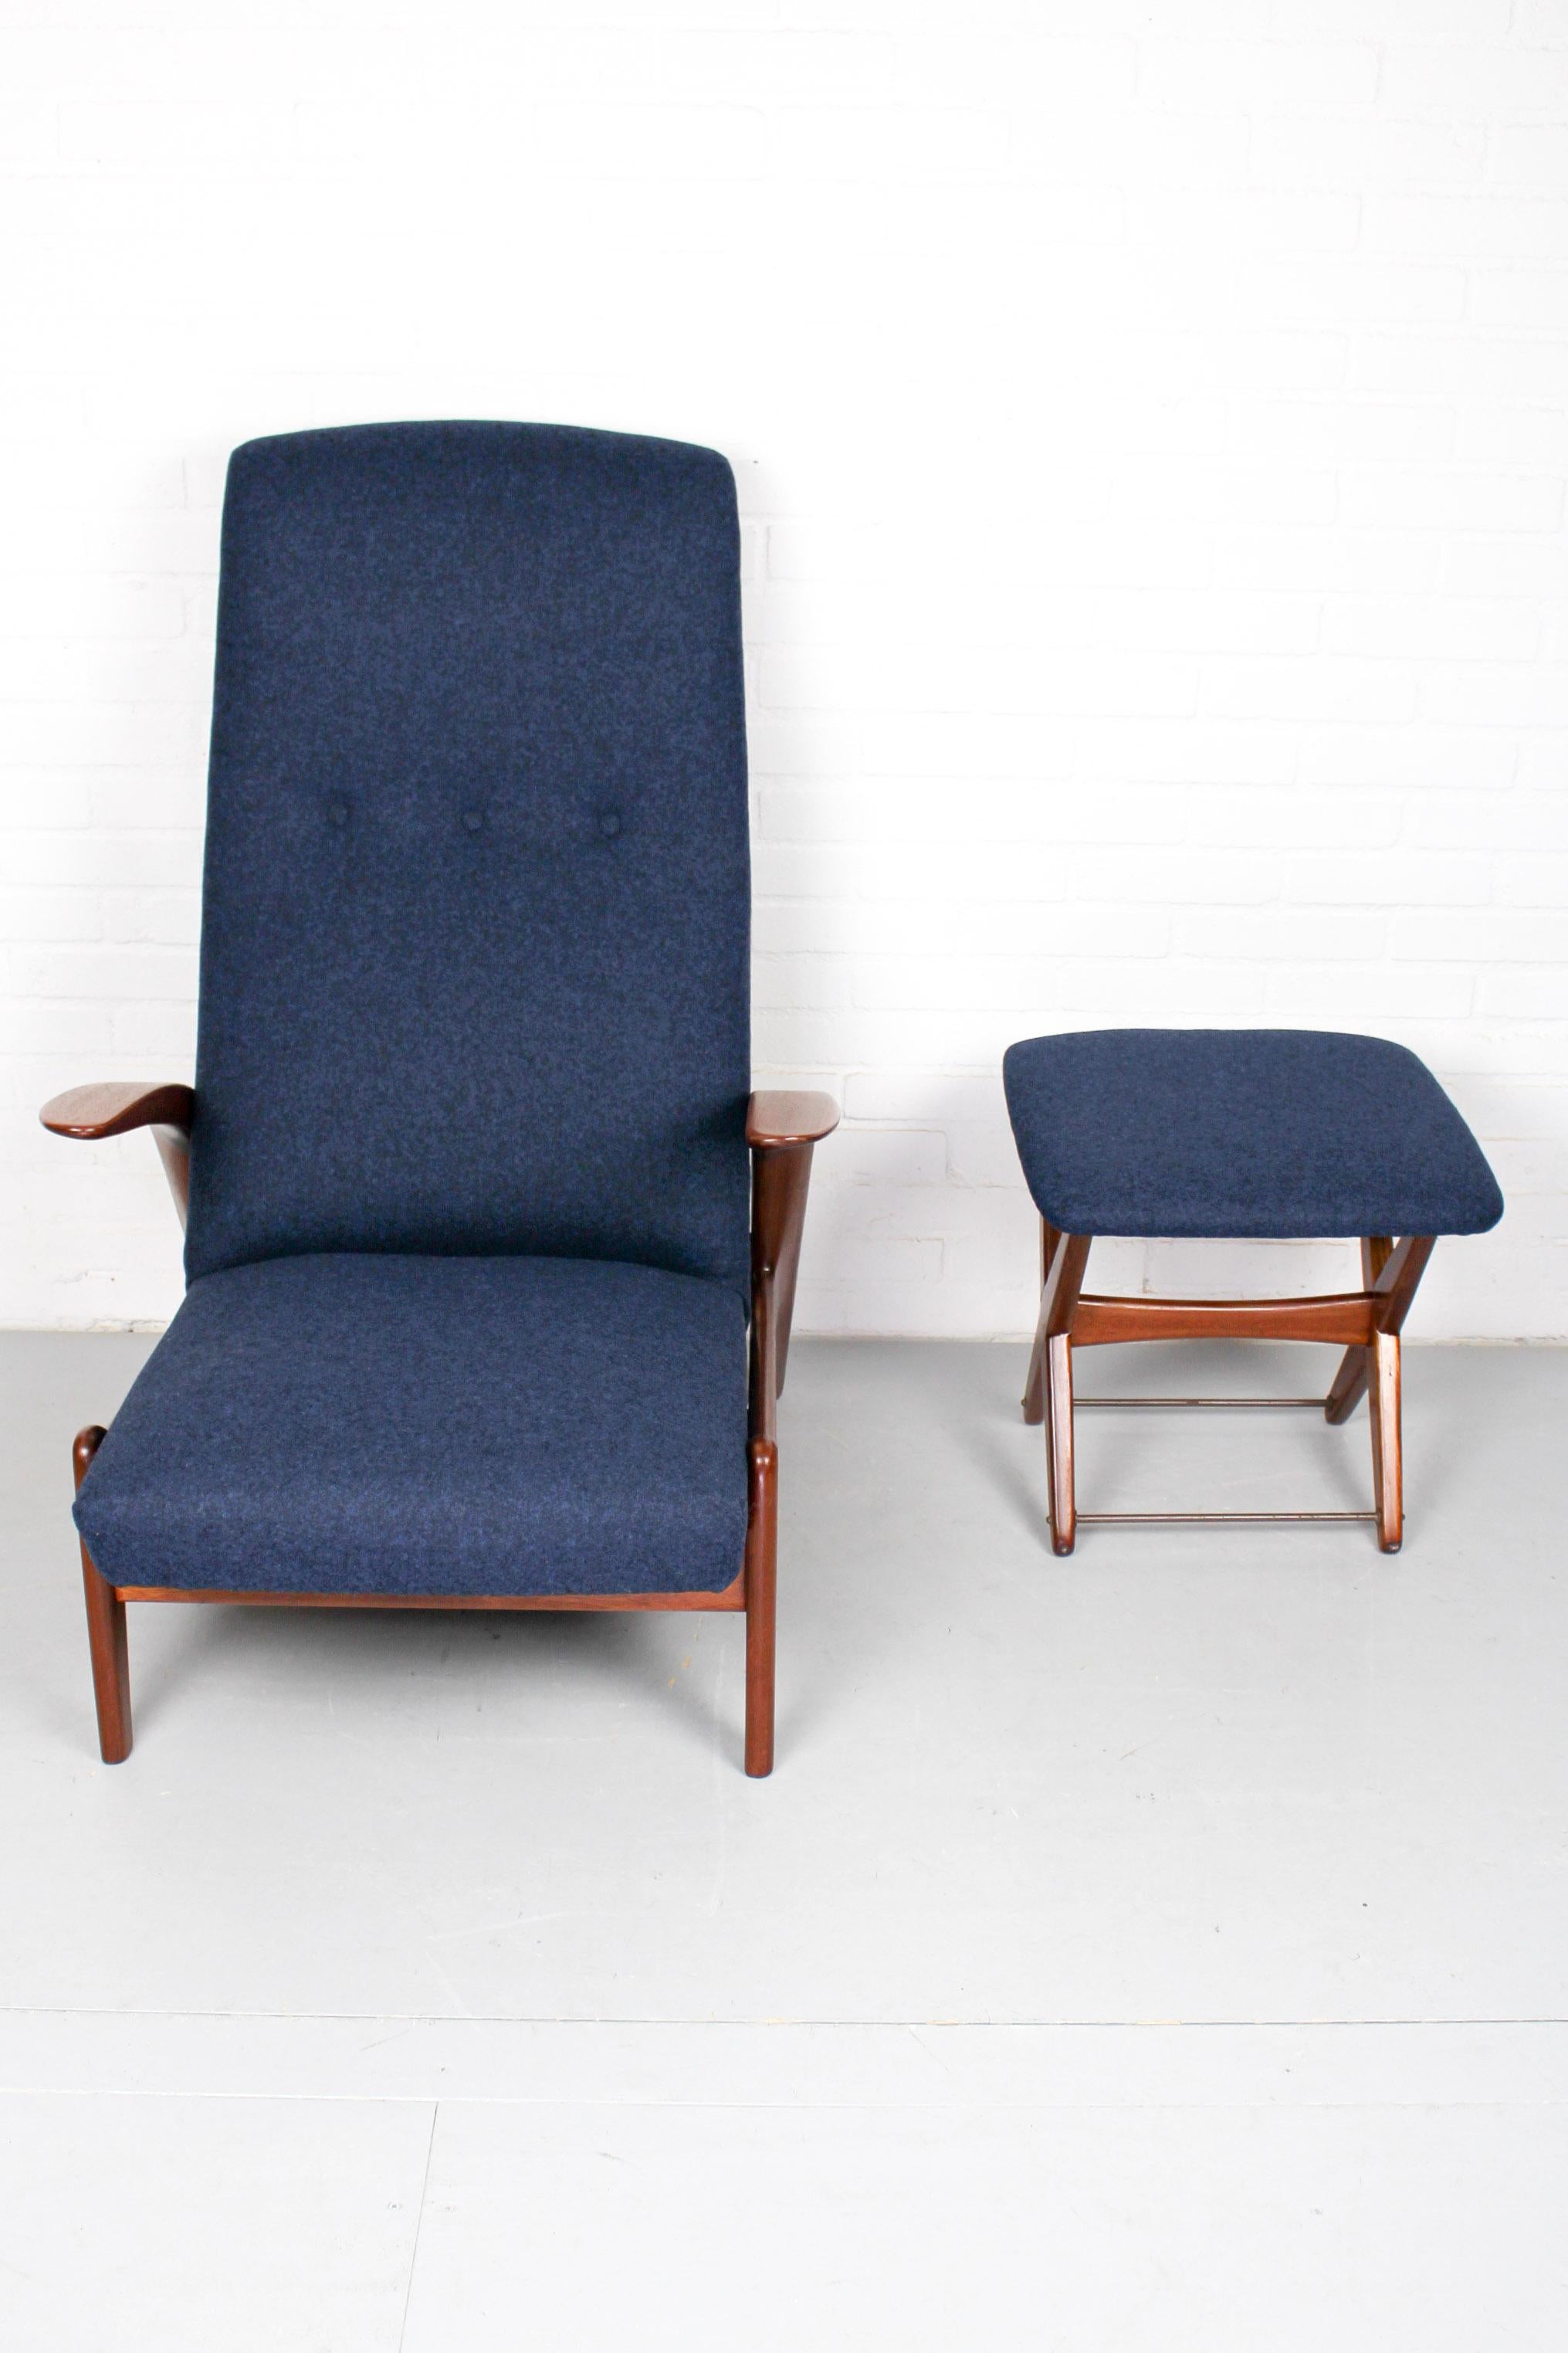 20th Century Rock n Rest Lounge Chair and Foot Stool by Gimson & Slater, circa 1960